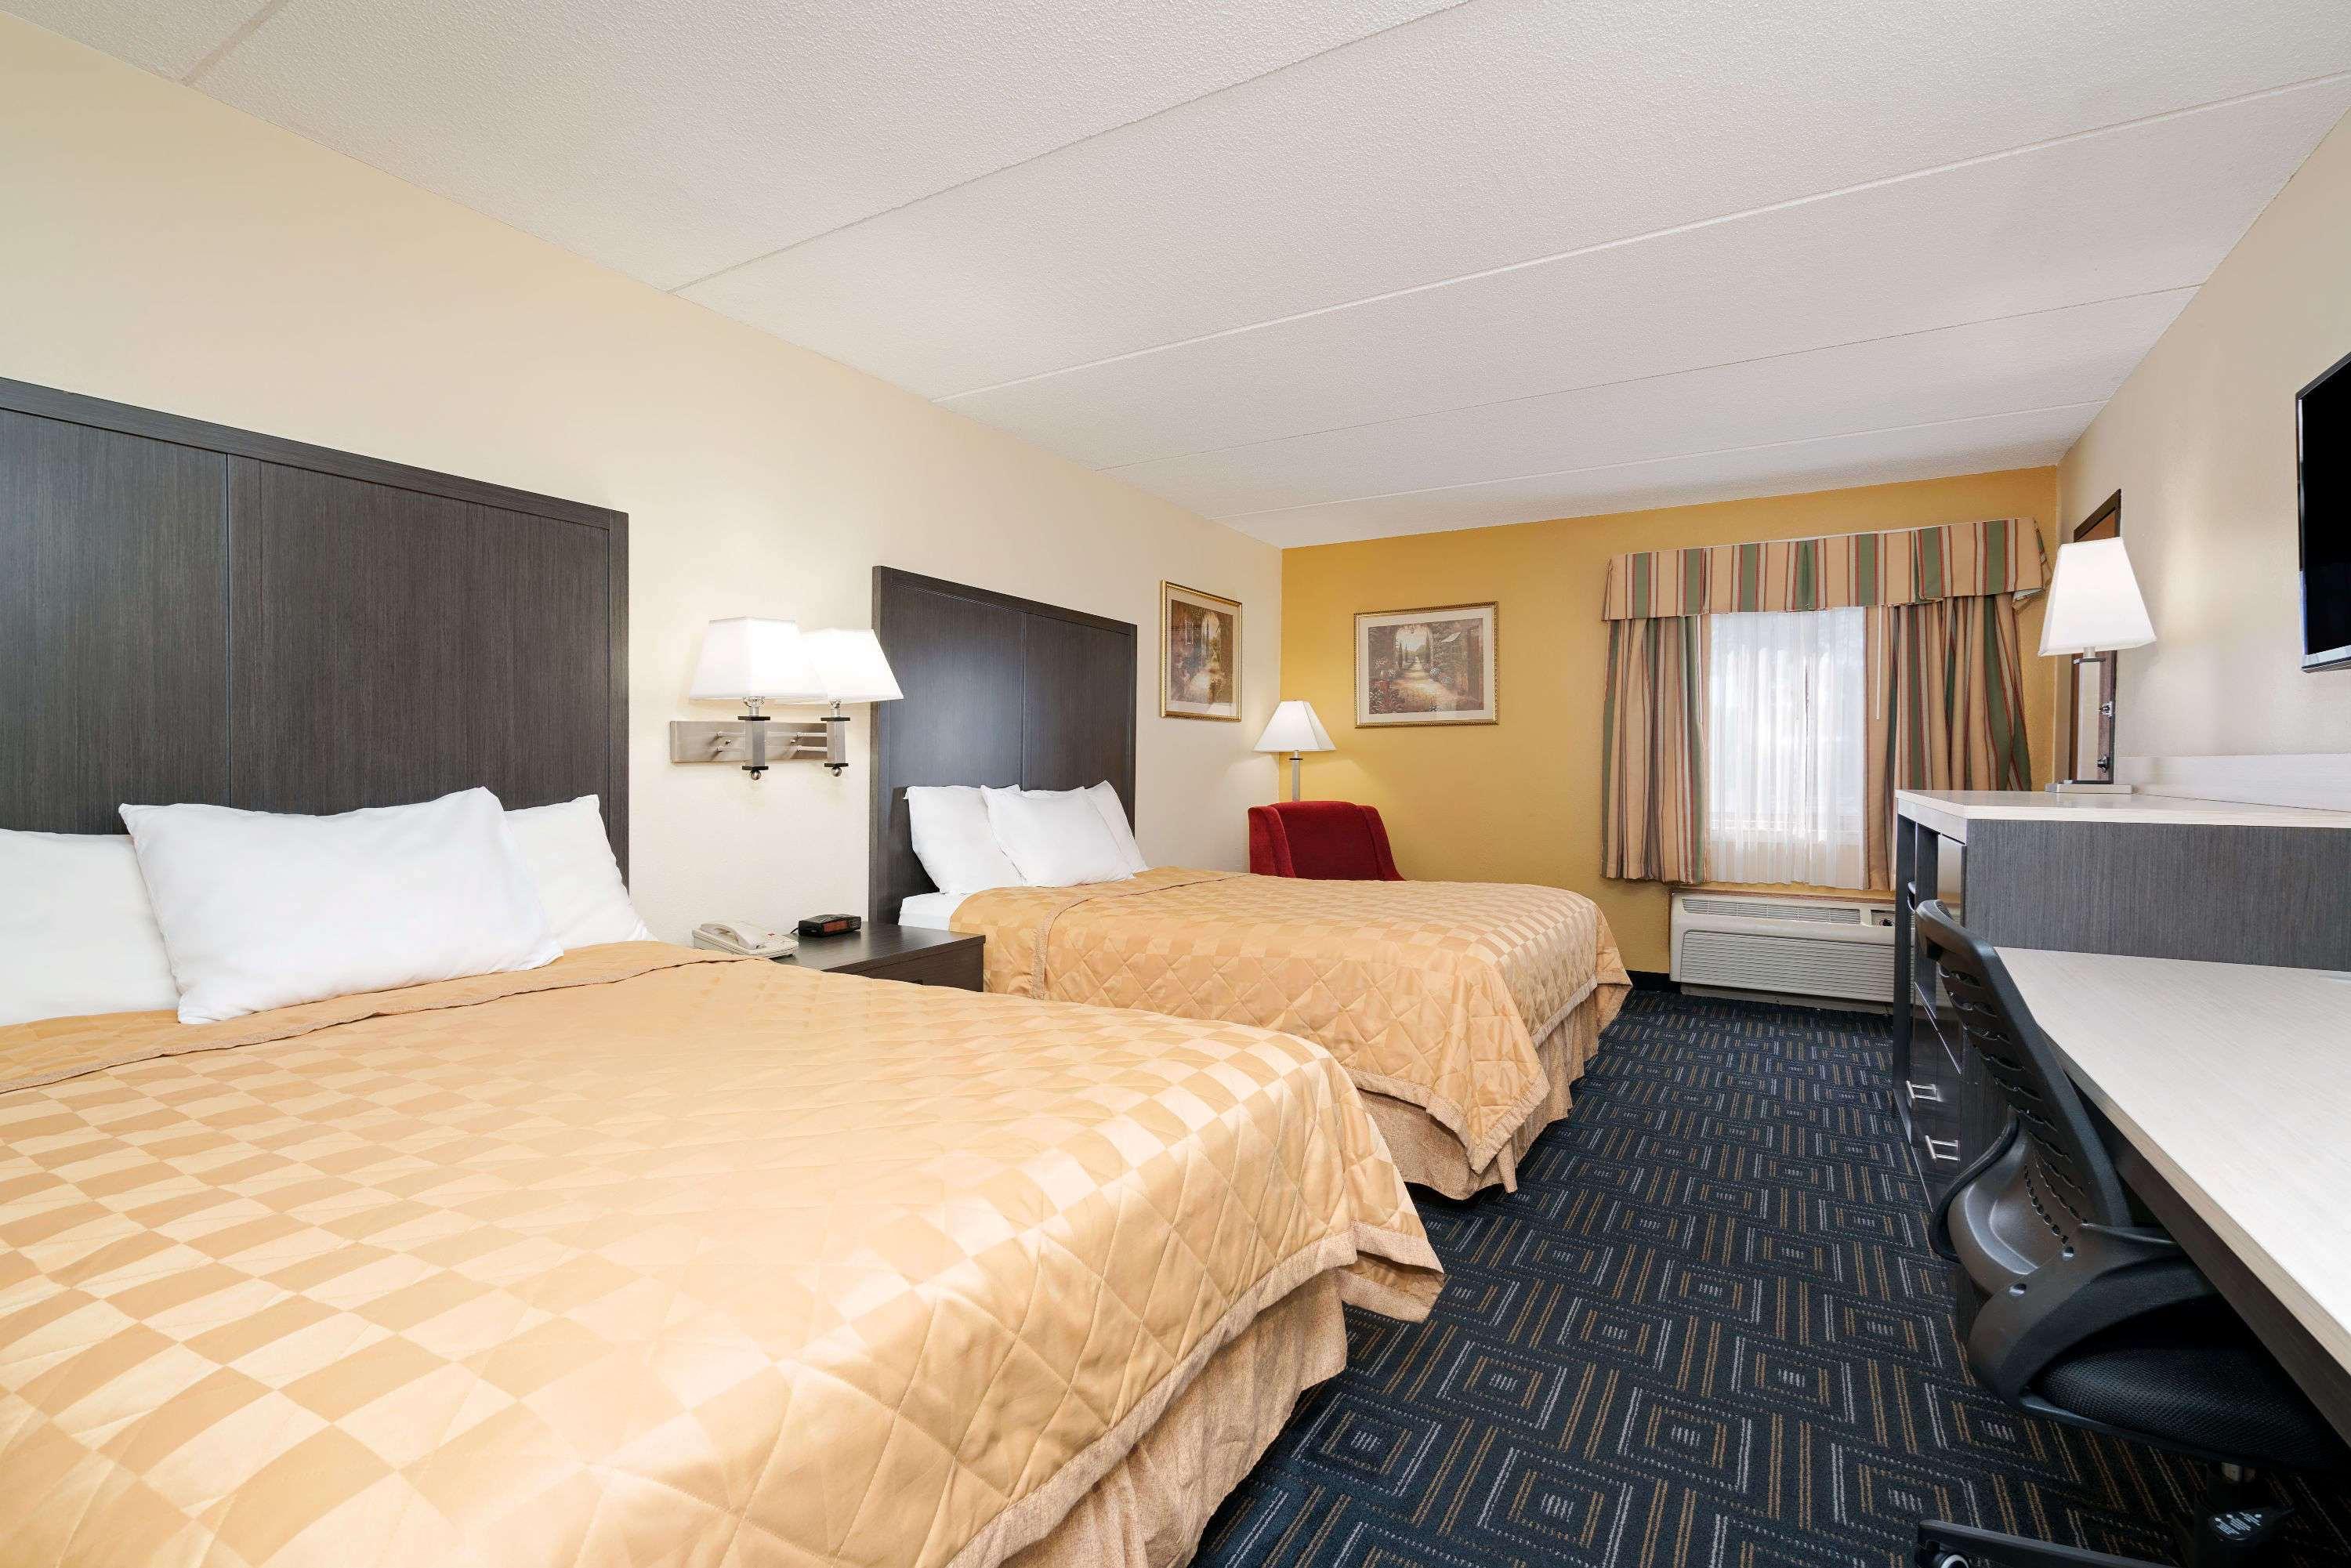 Days Inn Twin Cities North - Mounds View